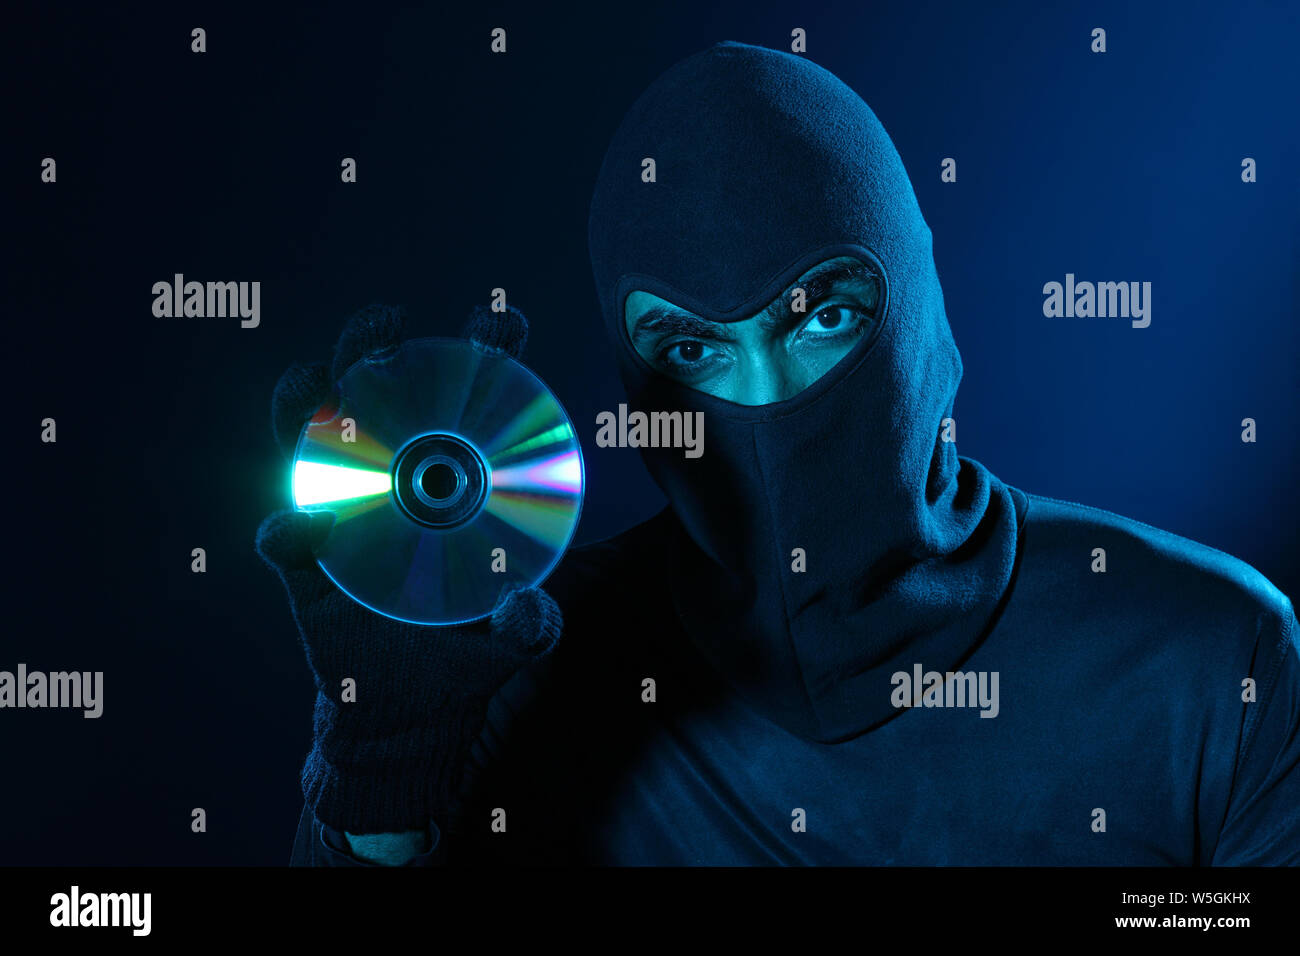 Hacker holding a pirated compact disc Stock Photo